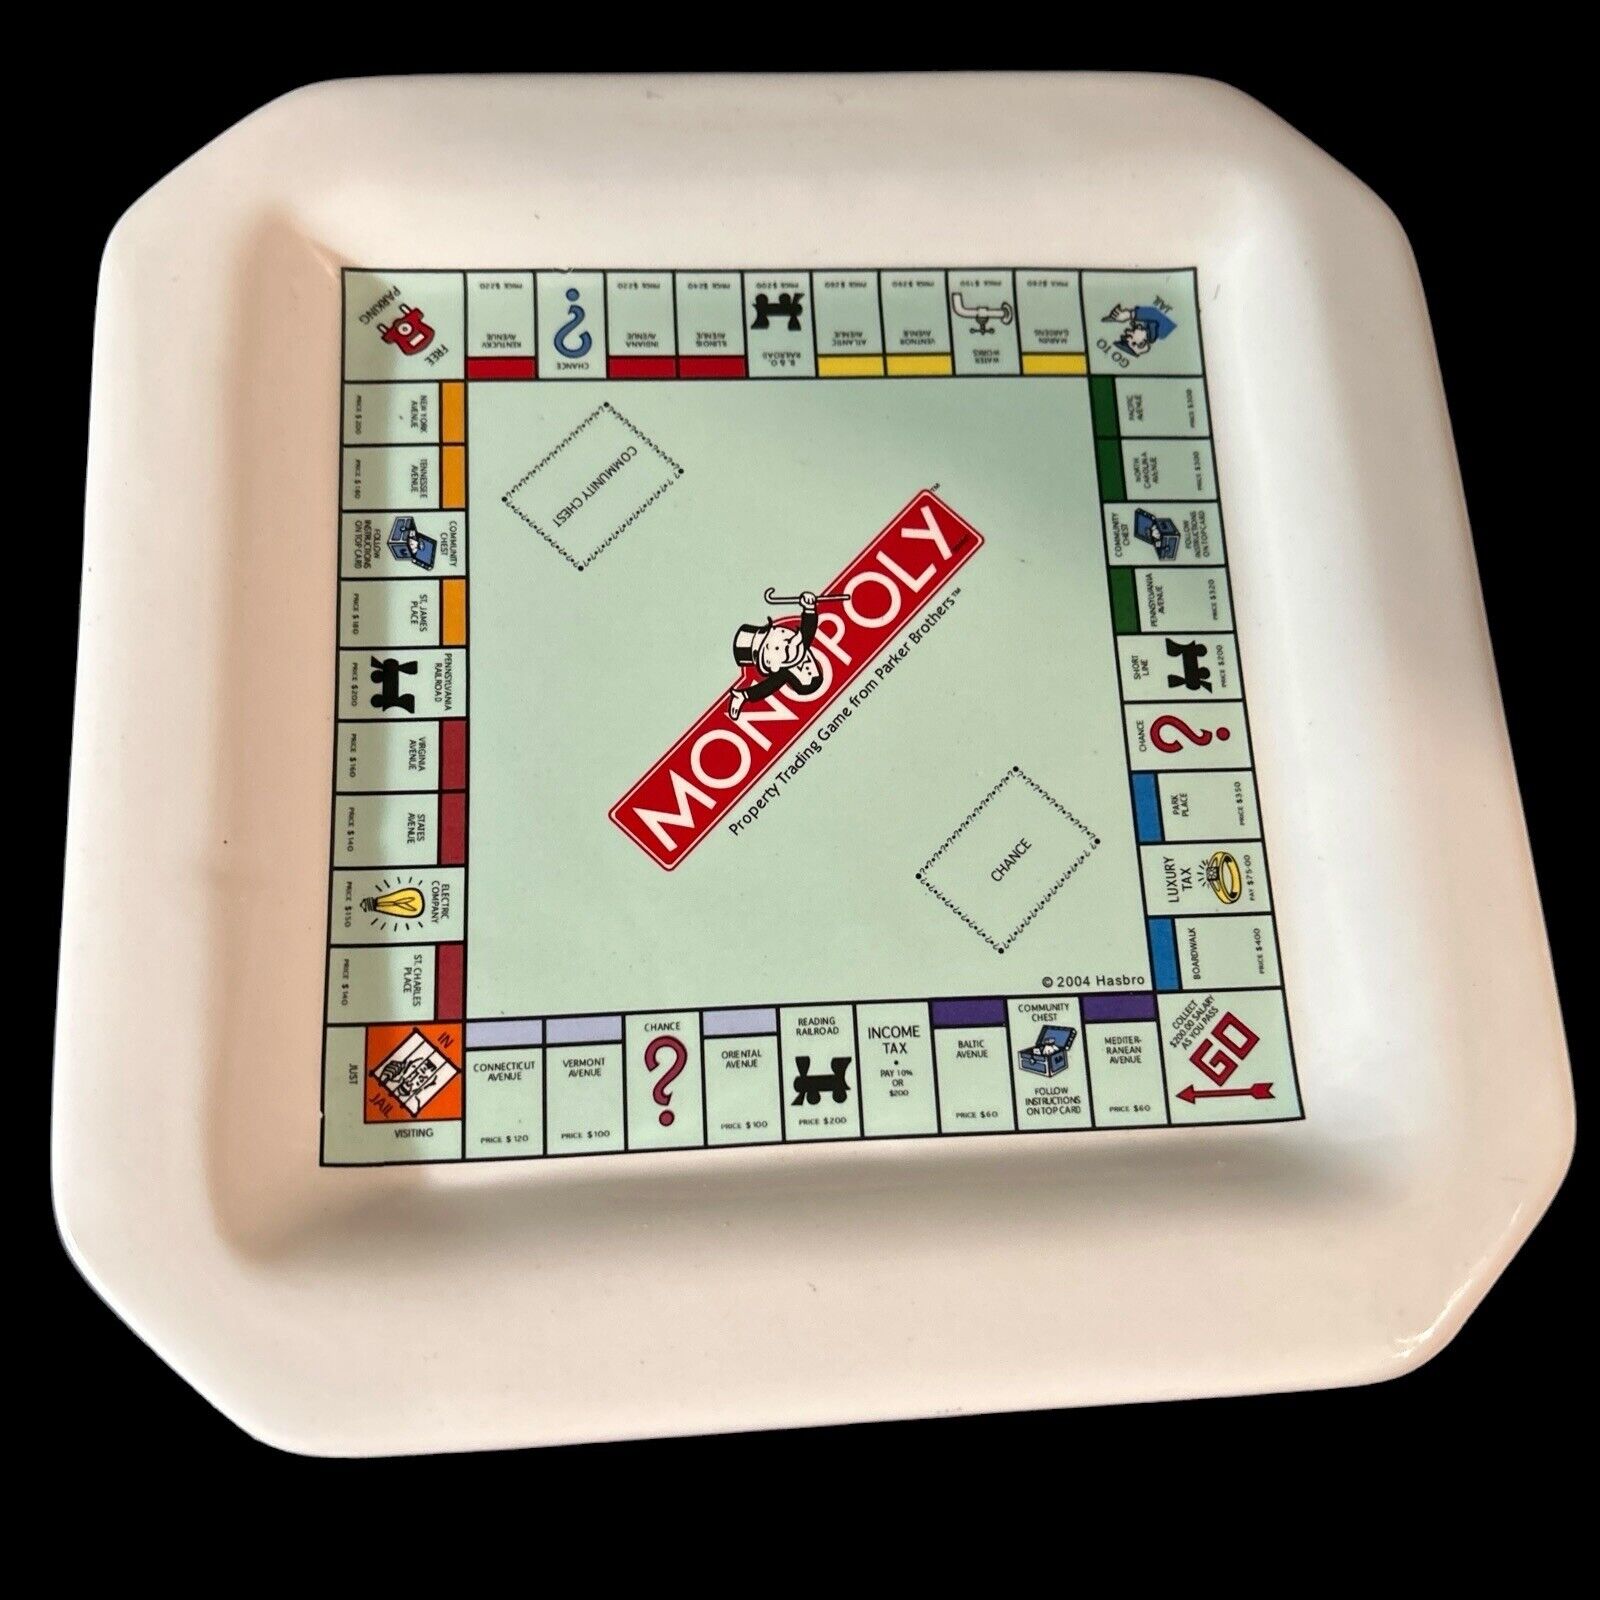 Vintage Monopoly Board Small Square Plate Wine Things Unlimited With Box